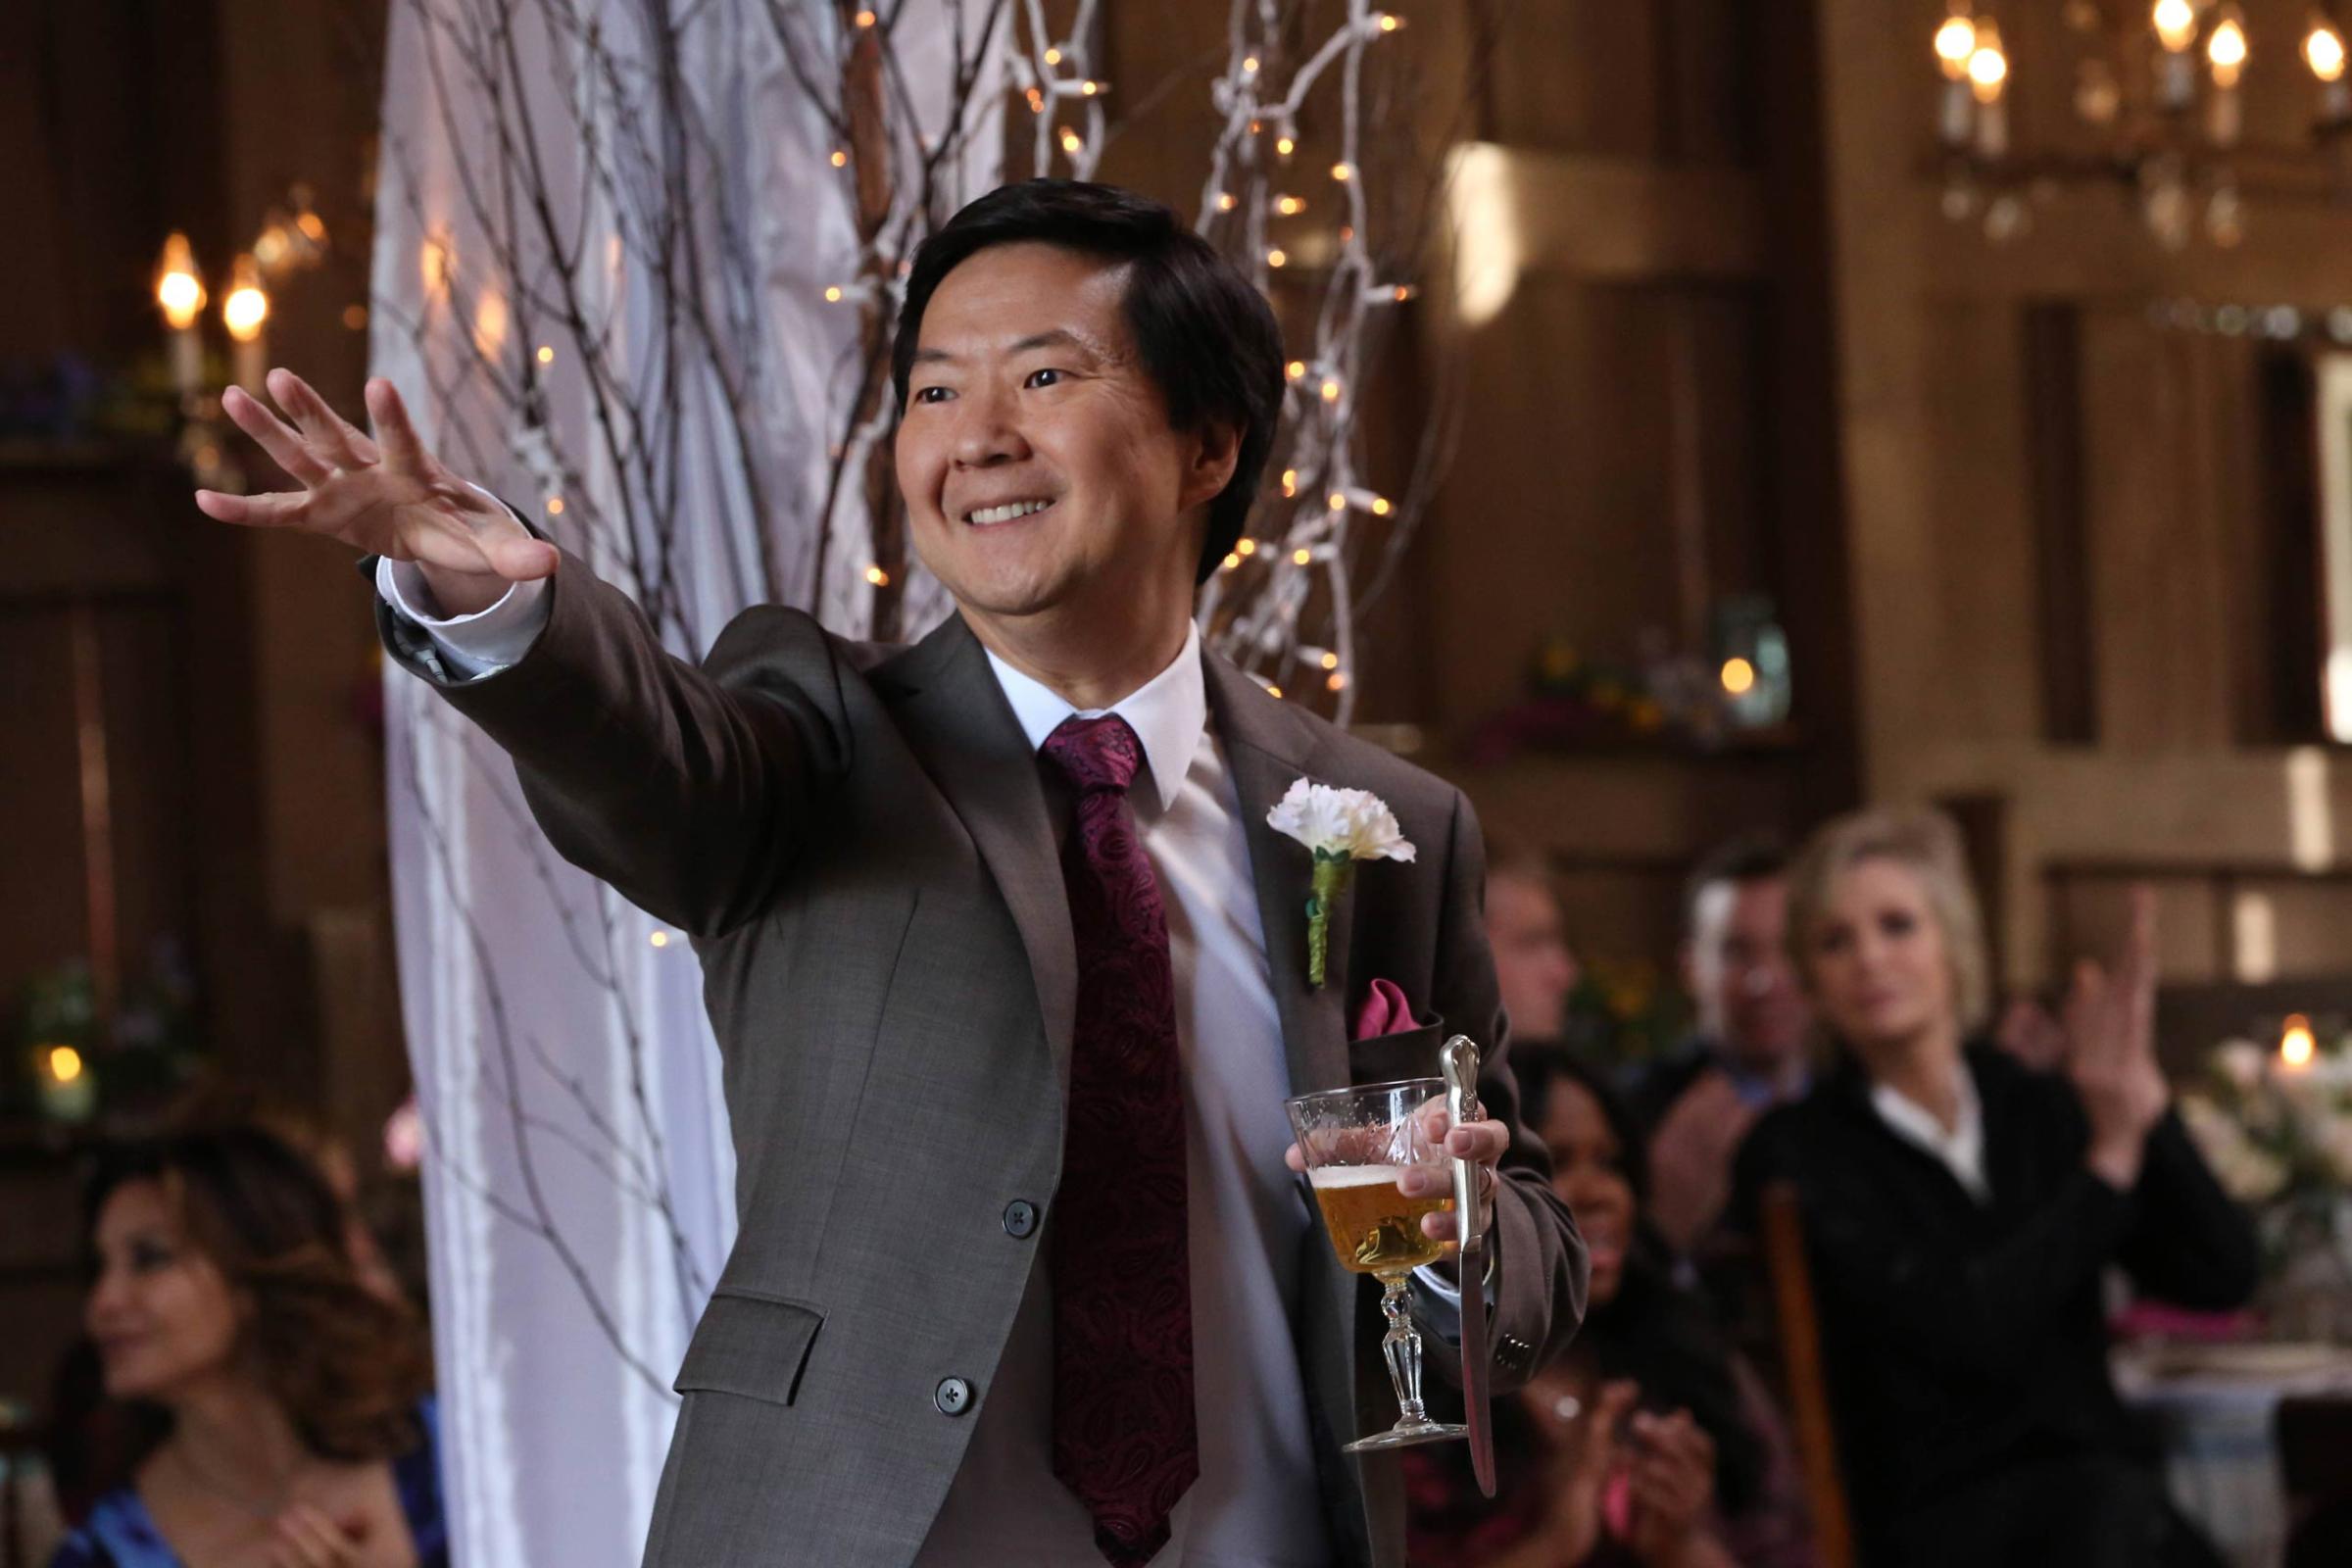 GLEE: Ken Jeong guest stars in the "Wedding" episode of GLEE airing Friday, Feb. 20 (9:00-10:00 PM ET/PT) on FOX. ©2015 Fox Broadcasting Co. CR: Adam Rose/FOX